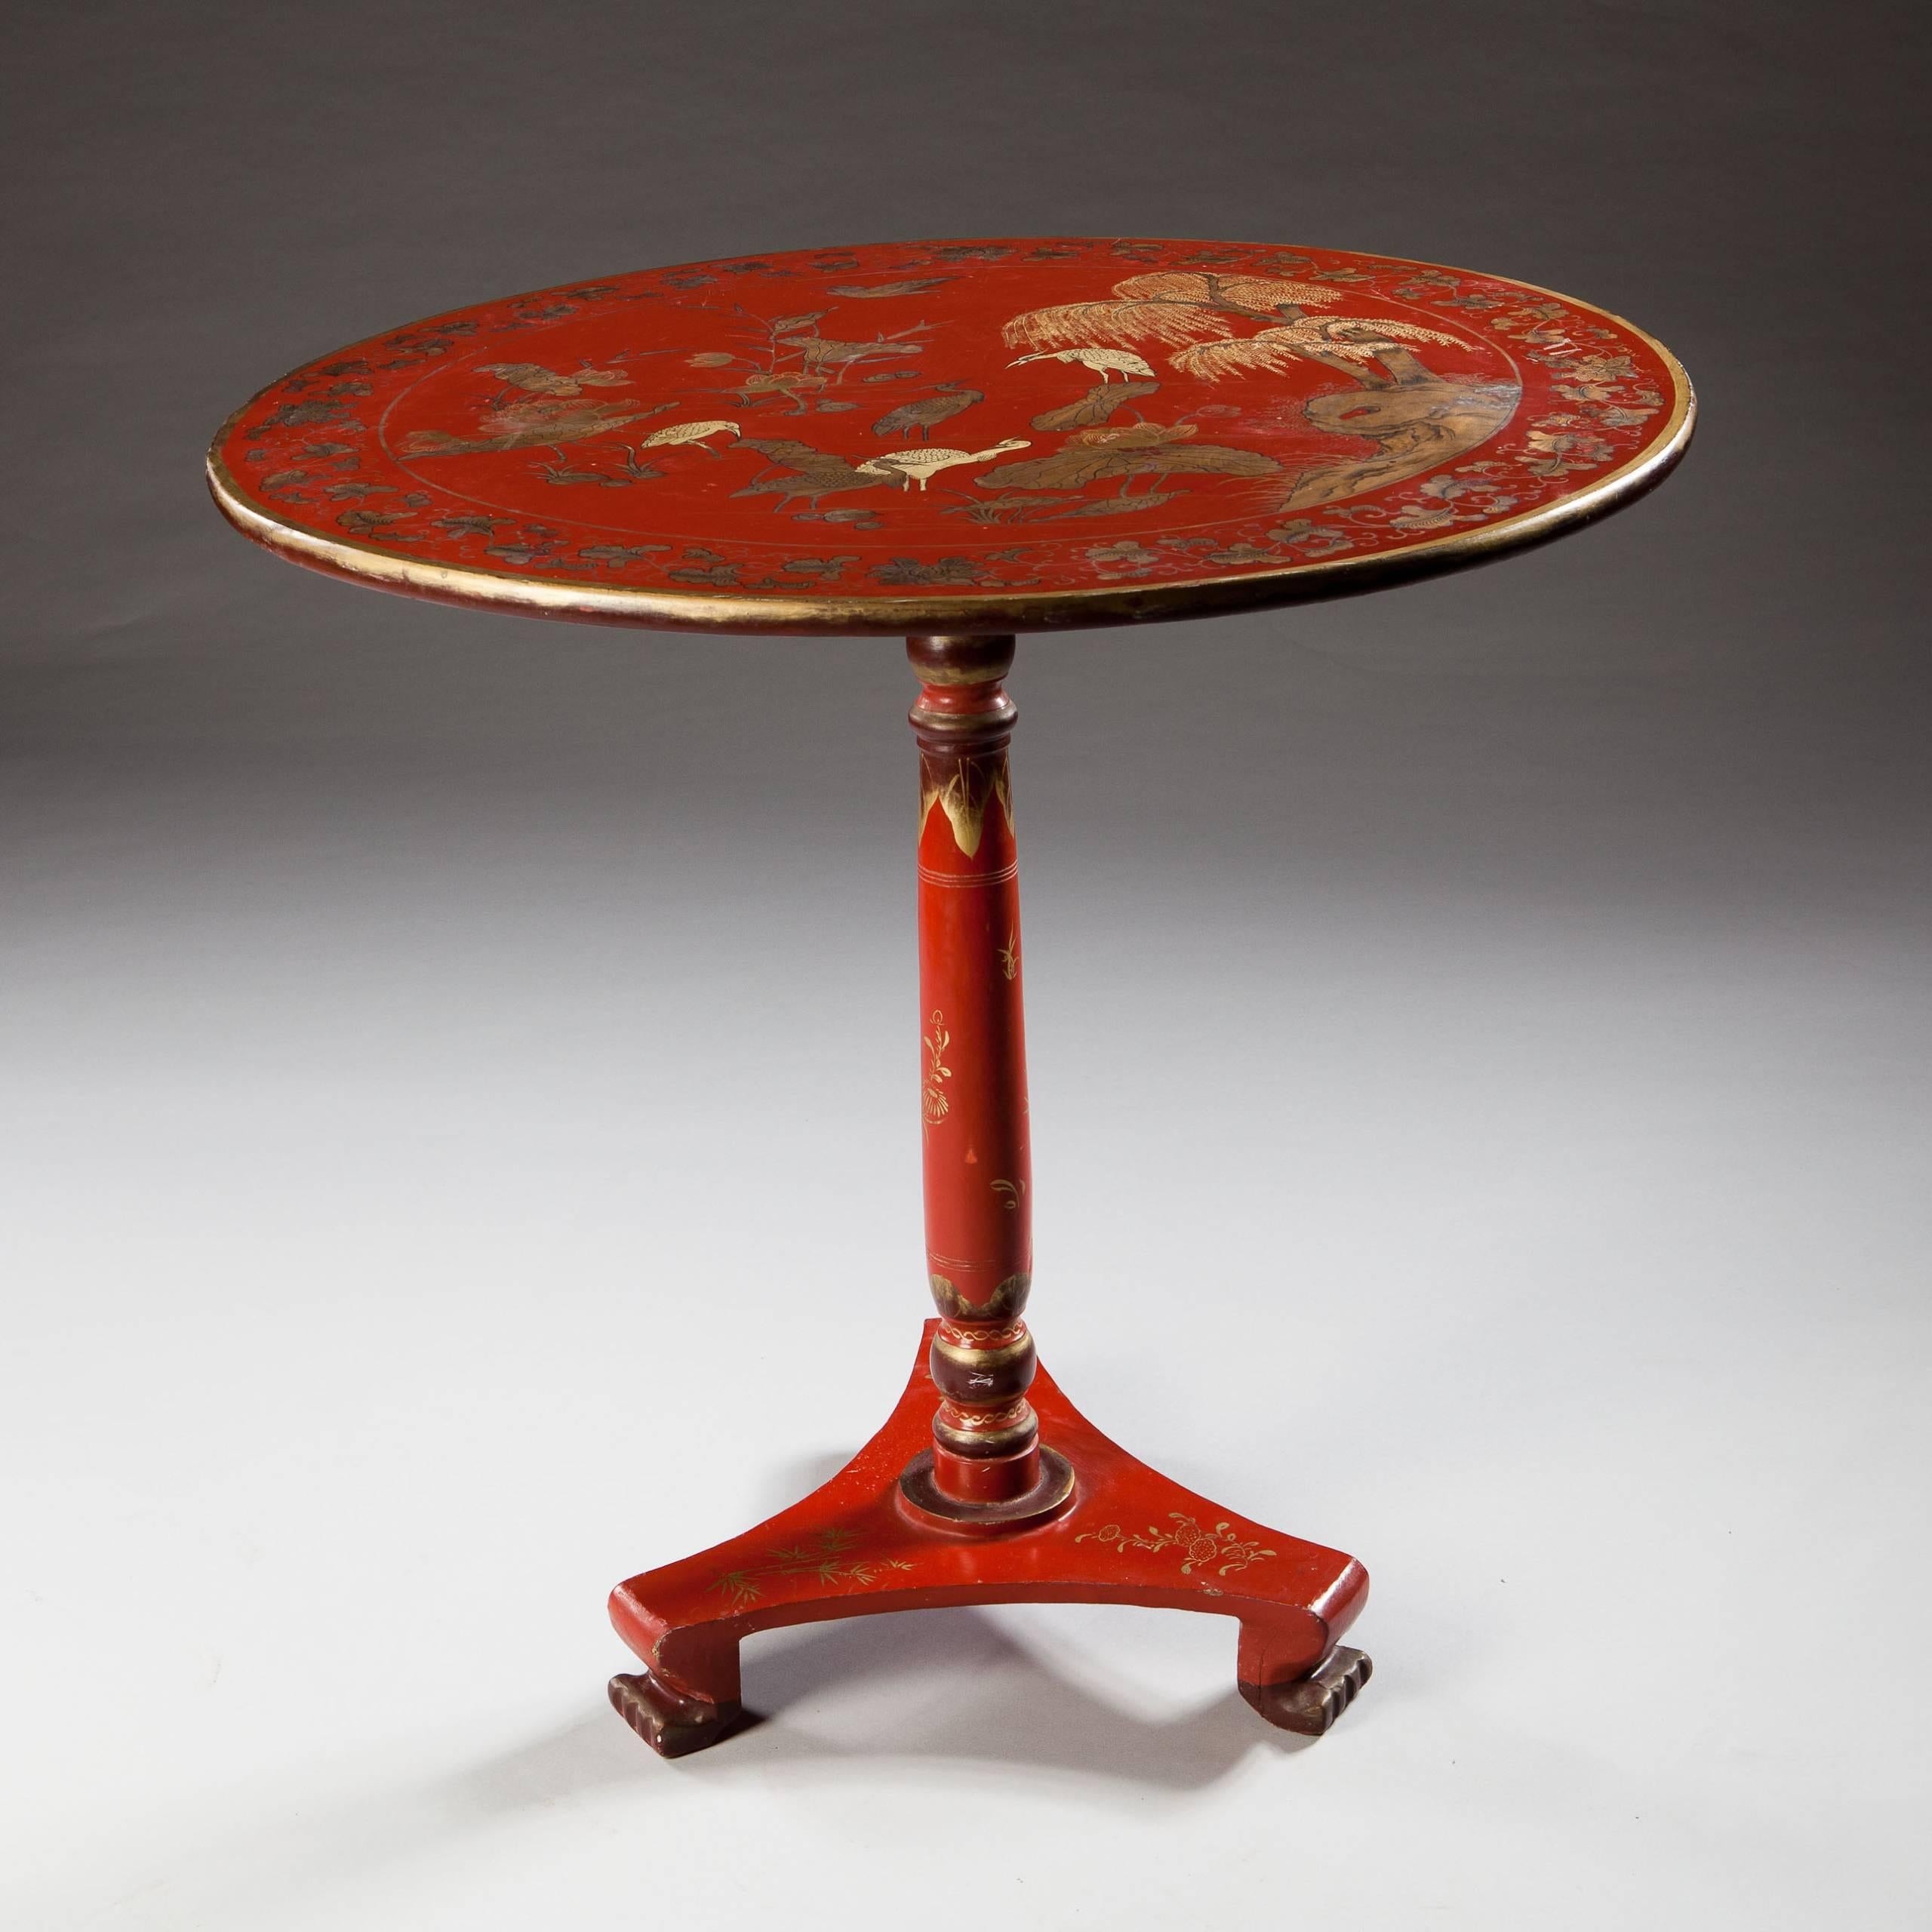 A decorative red lacquer tilt-top table, the top decorated in two tones of gilt with birds and foliage, raised on a turned column and supported paw feet.
Measures:
Height 83.00cm (32 1/2 inches).
Diameter 83.00cm (32 1/2 inches).